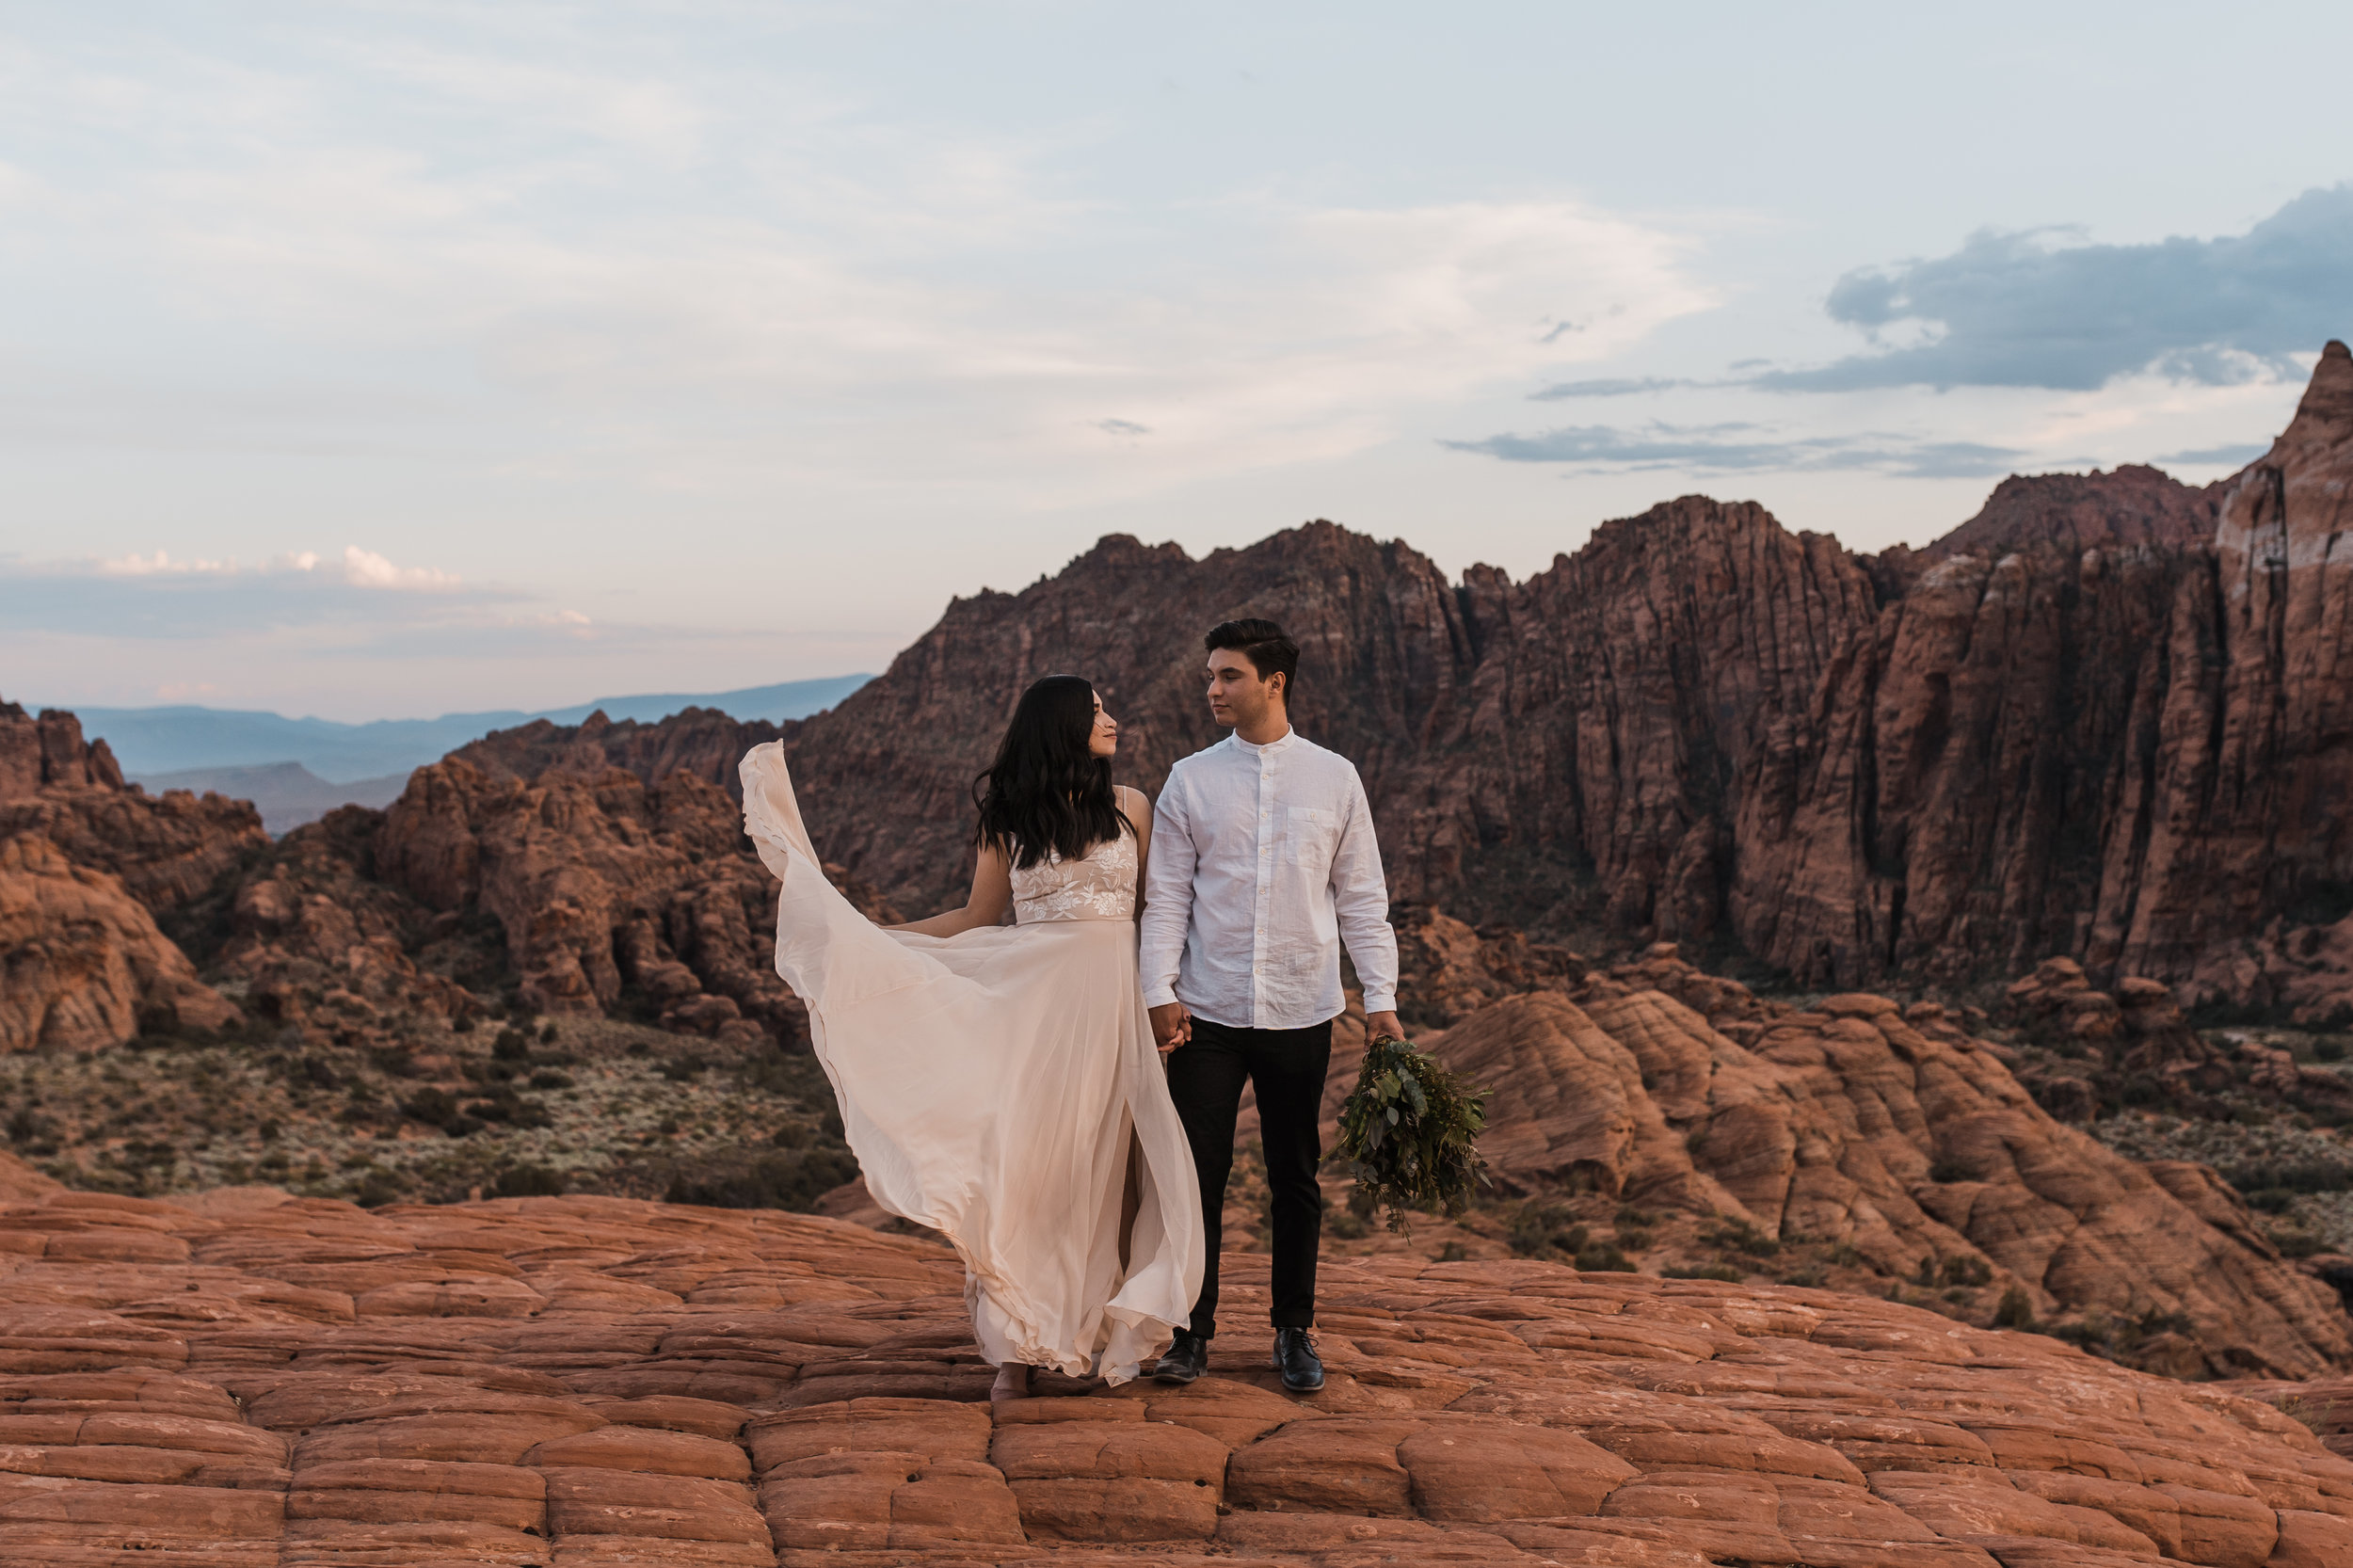 Snow Canyon State Park Elopement | Between the Pine Adventure Elopement Photography